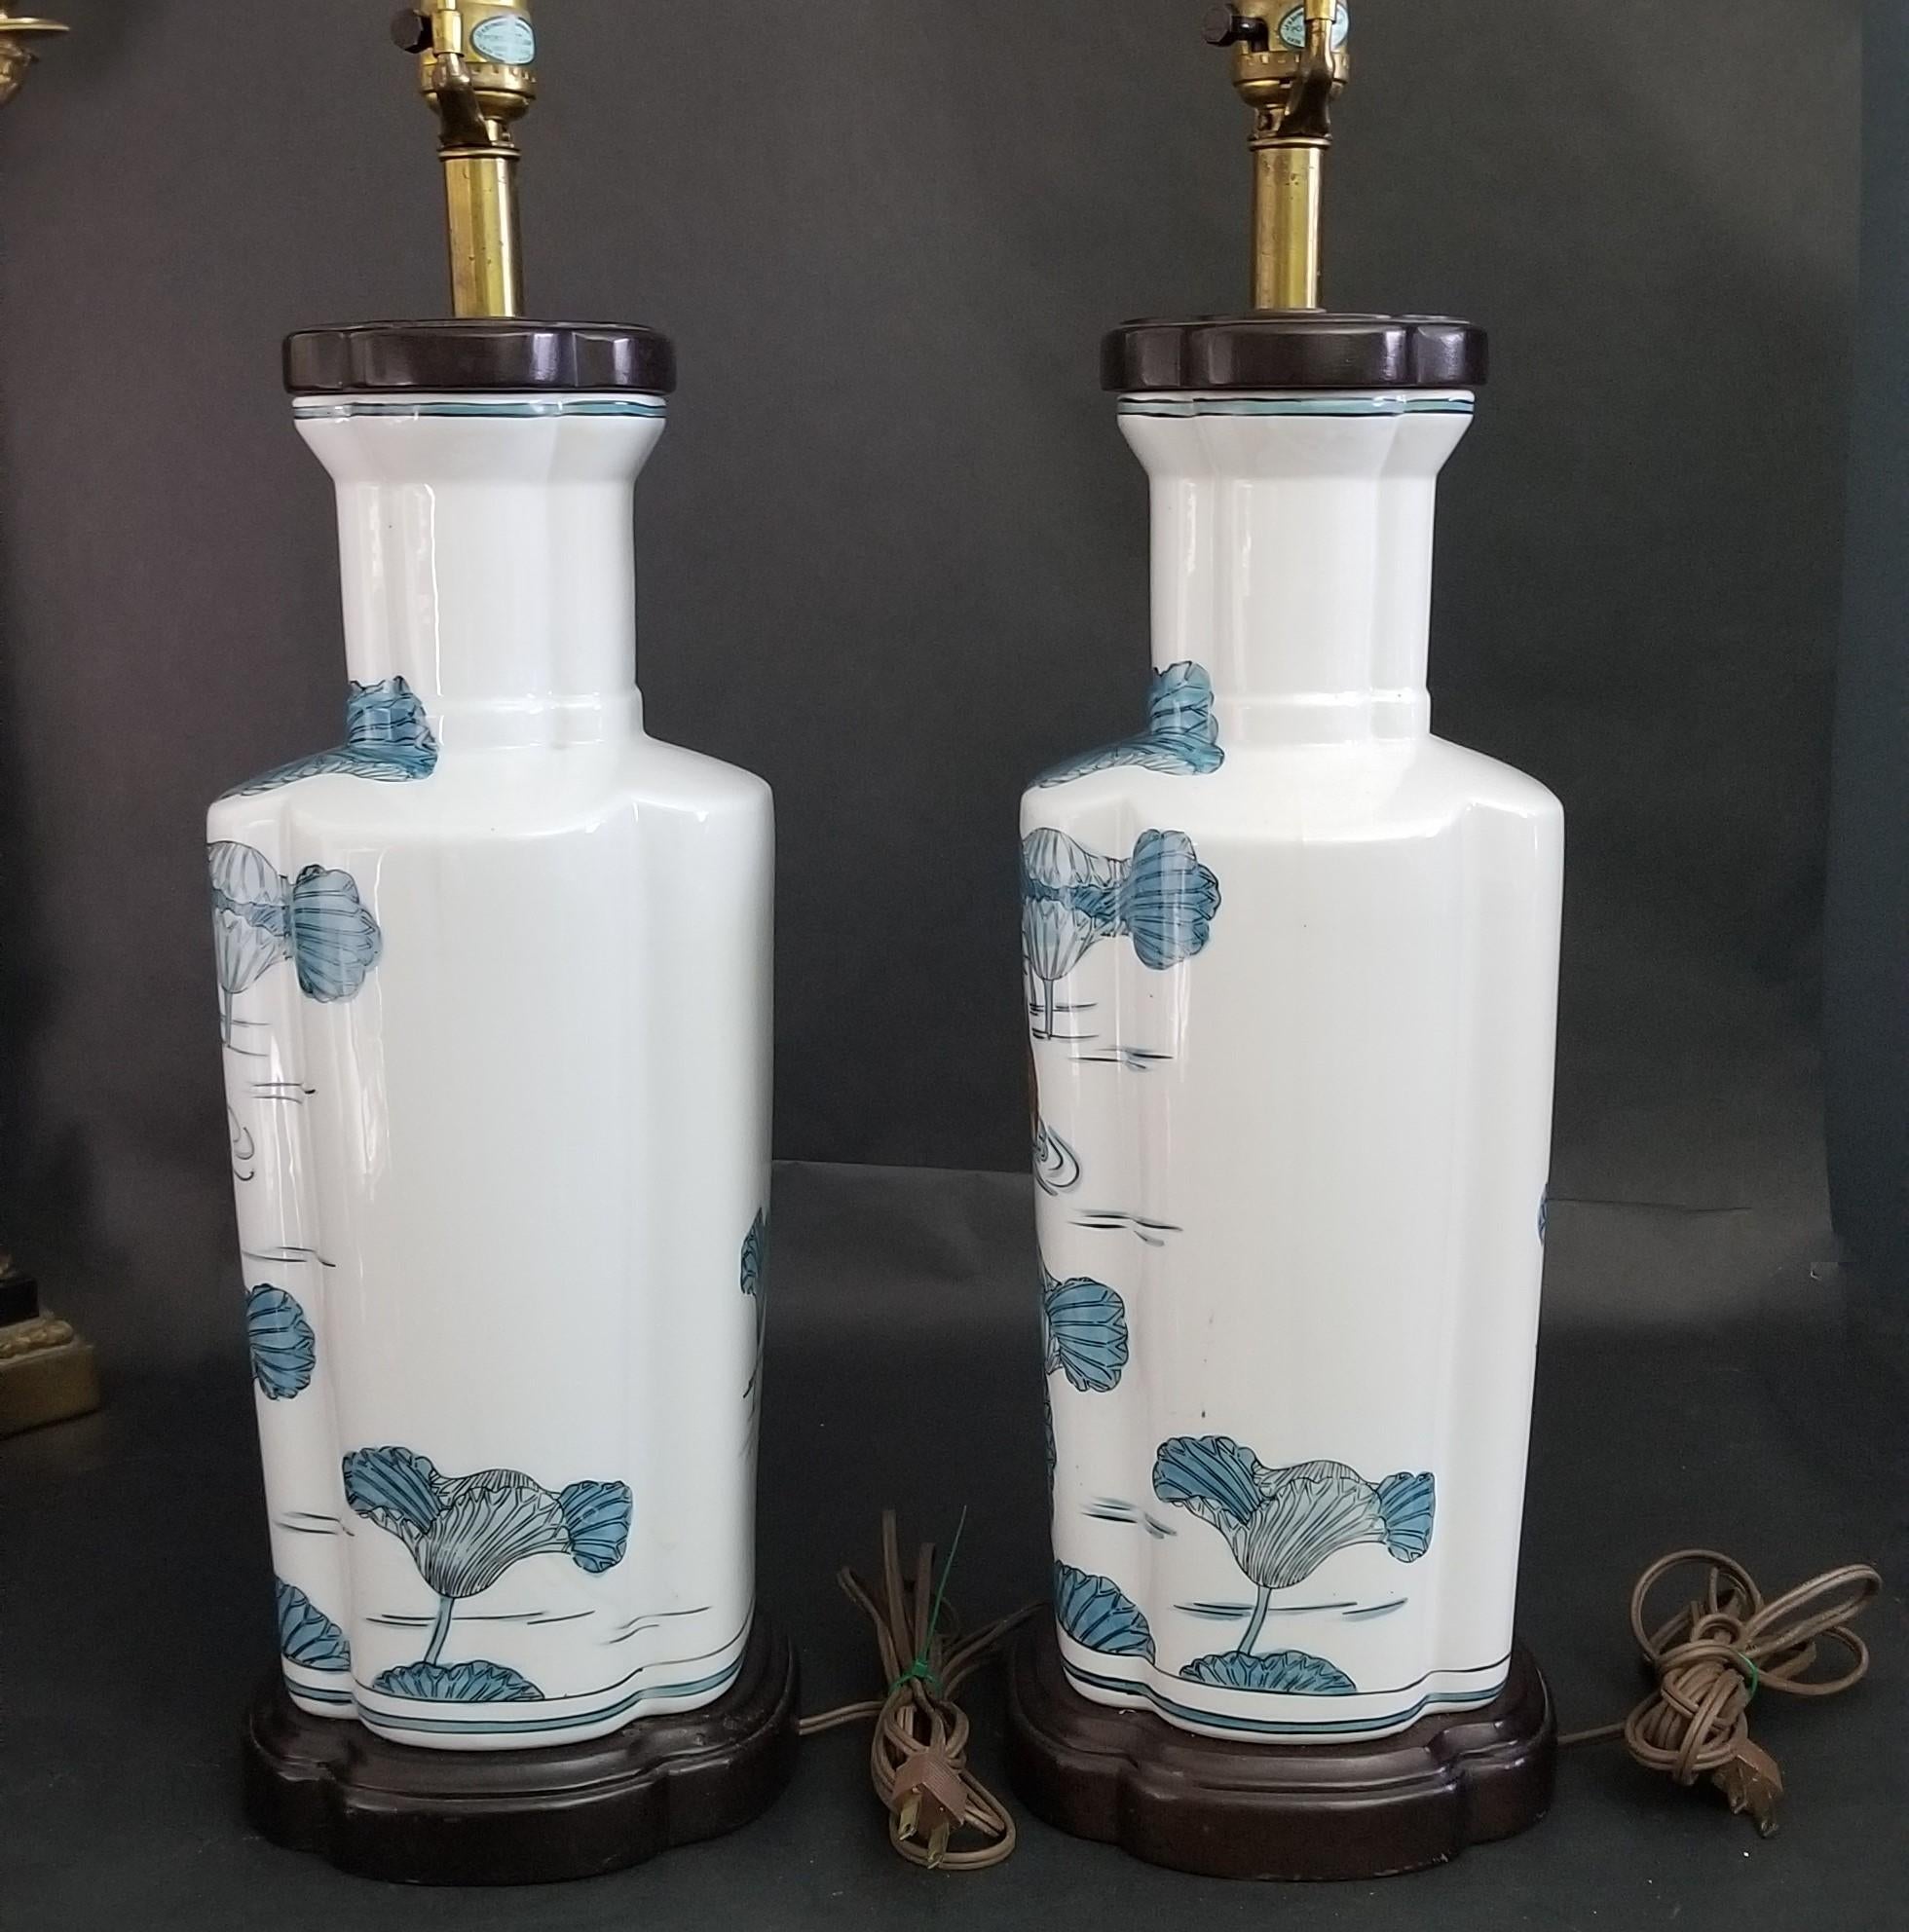 Offering One Of Our Recent Palm Beach Estate Fine Lighting Acquisitions Of A
Pair of 1970's KNOB CREEK Asian Influenced Porcelain and Wood Quatrefoil Shaped Lamps
They have the Knob Creek label.

Beautiful lamps with Water Lilies, Flowers and